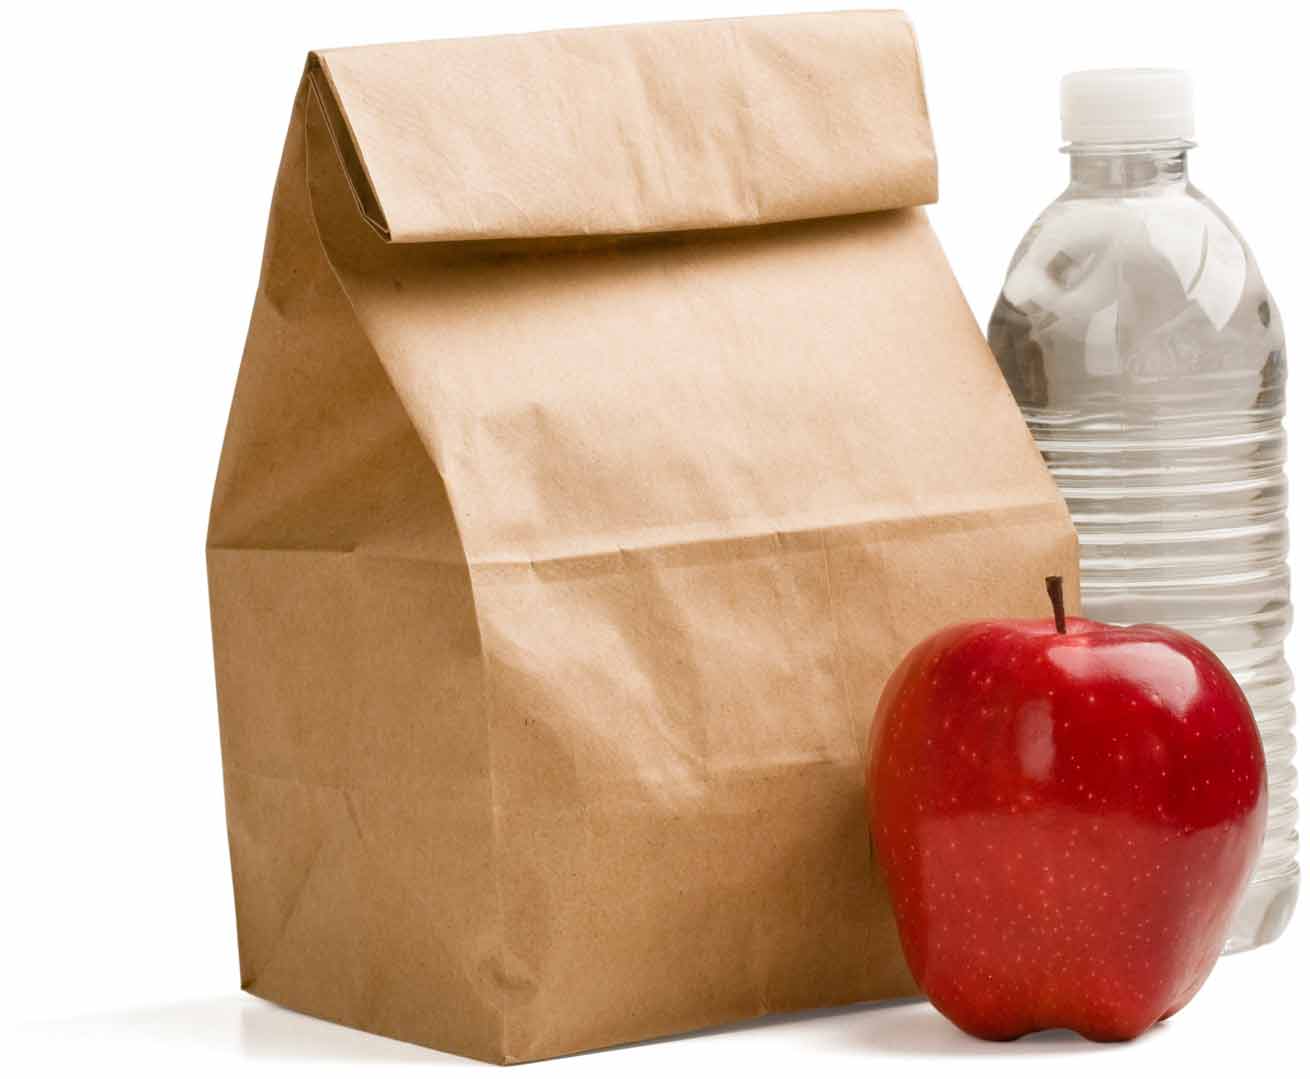 sack-lunchwith apple